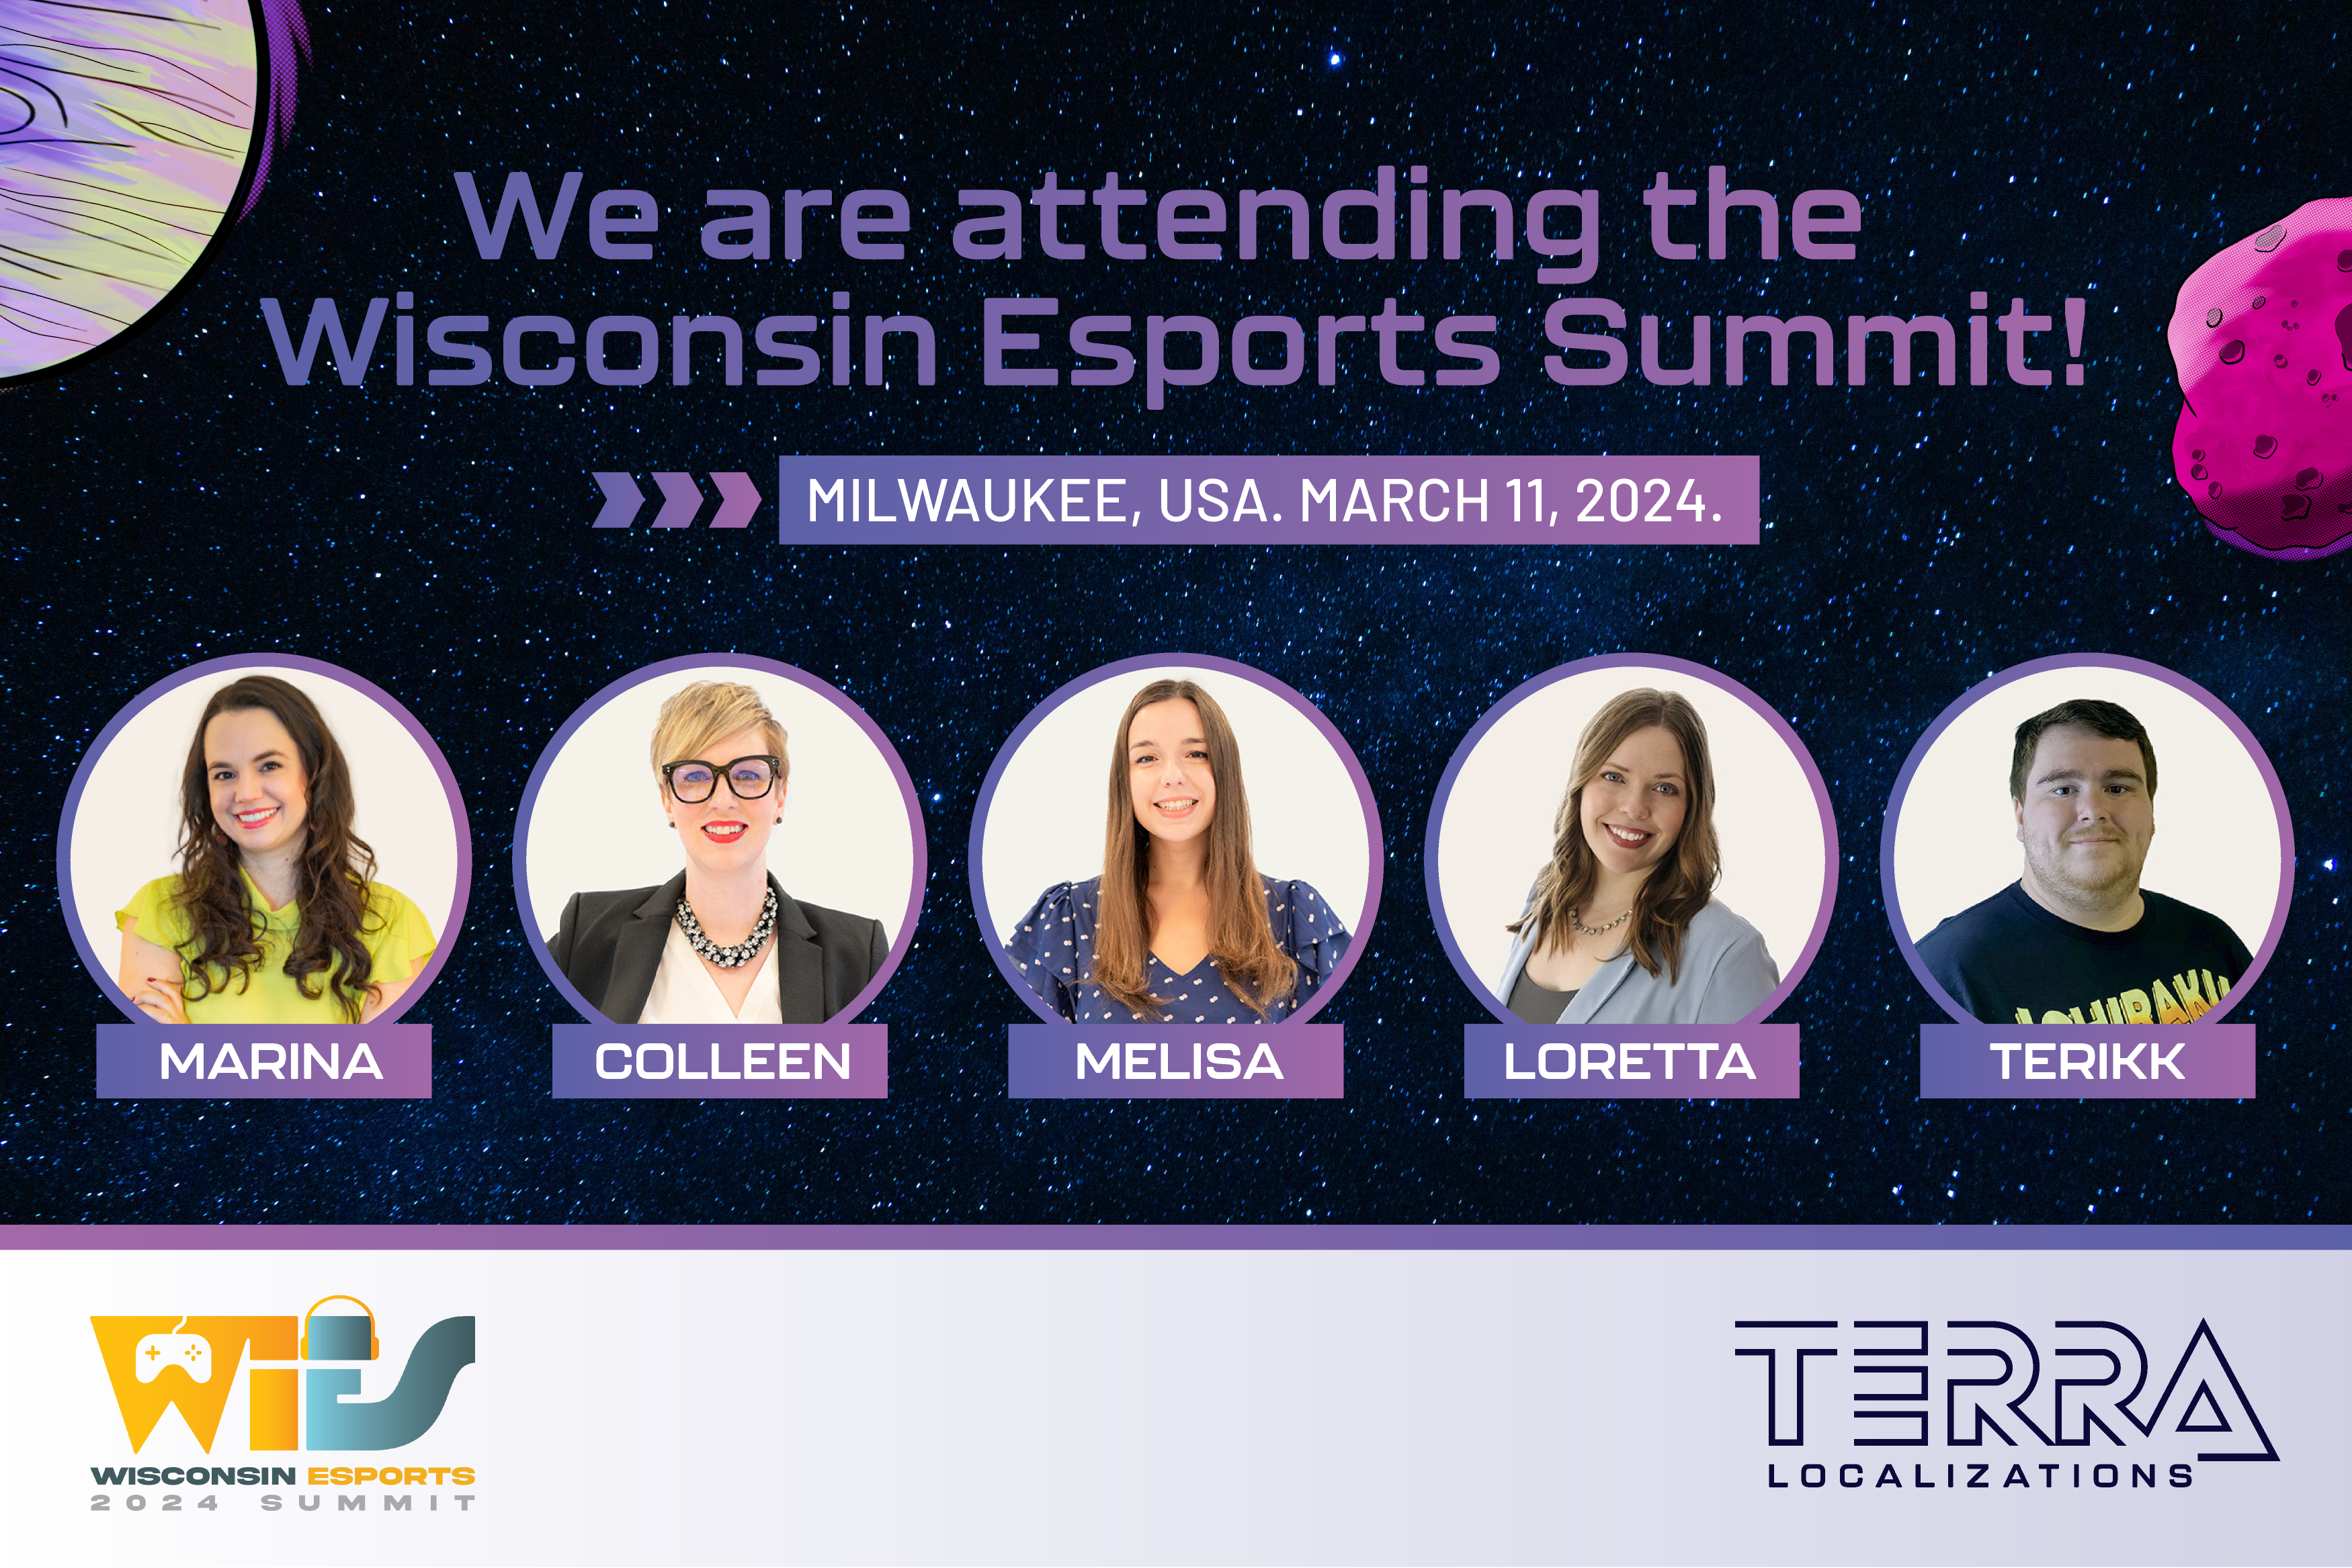 We are attending the Wisconsin Esports Summit!